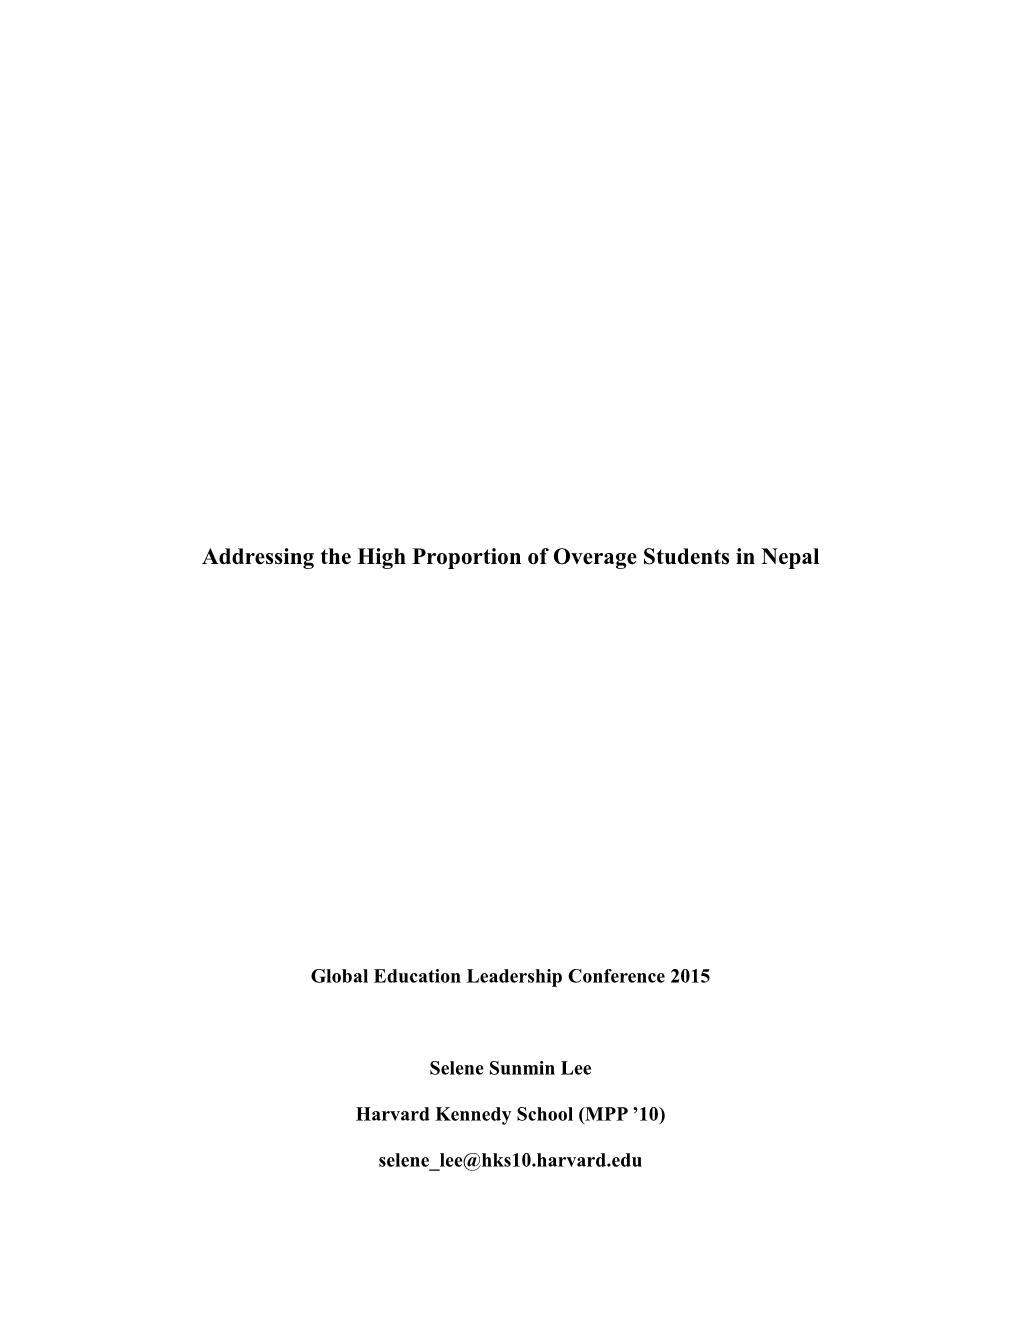 Addressing the High Proportion of Overage Students in Nepal